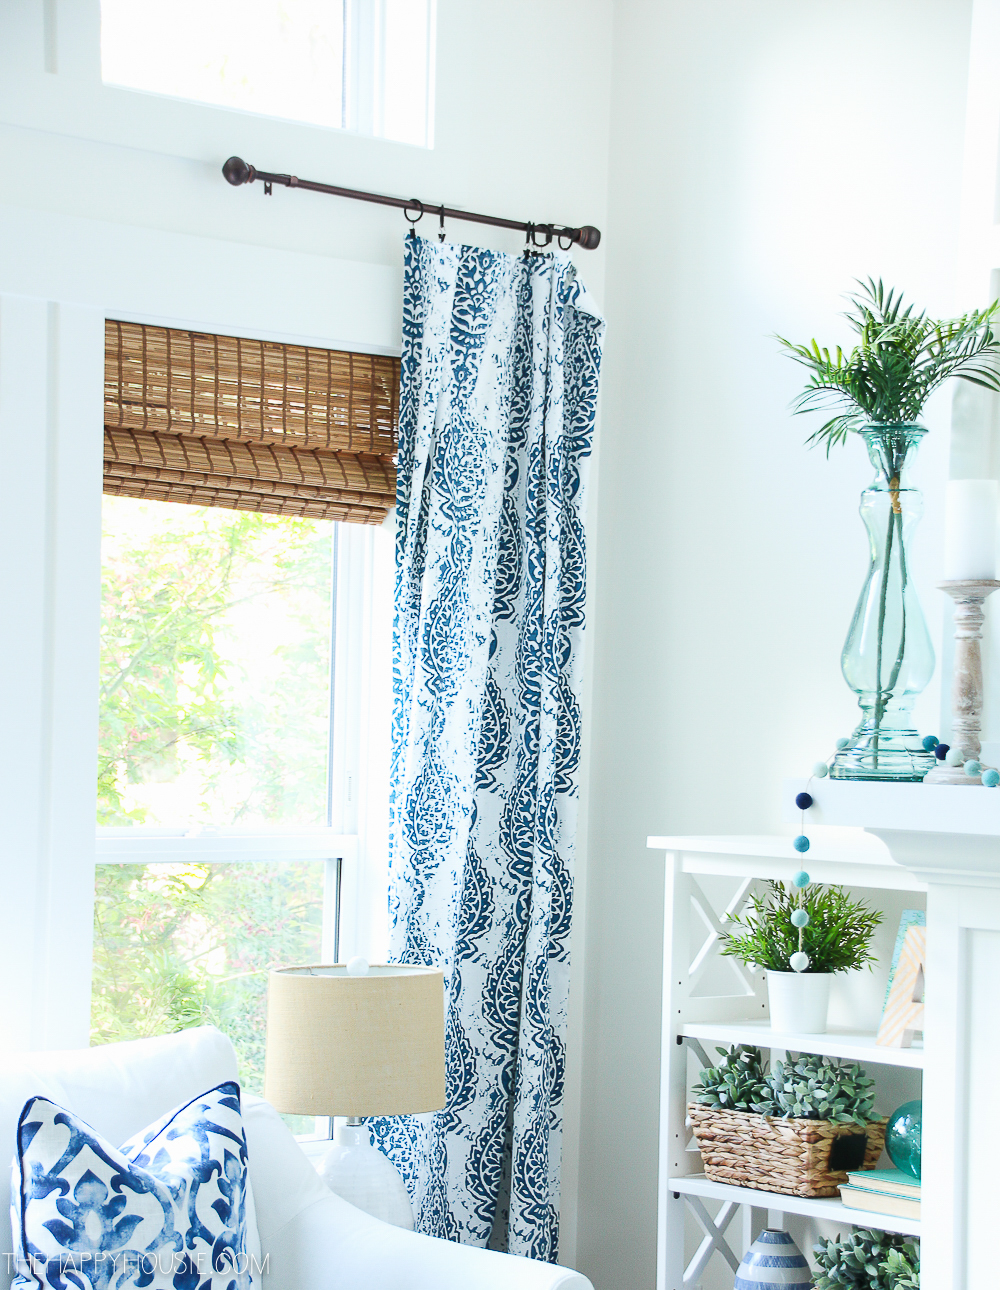 The blue and white patterned curtains hanging in the living room.